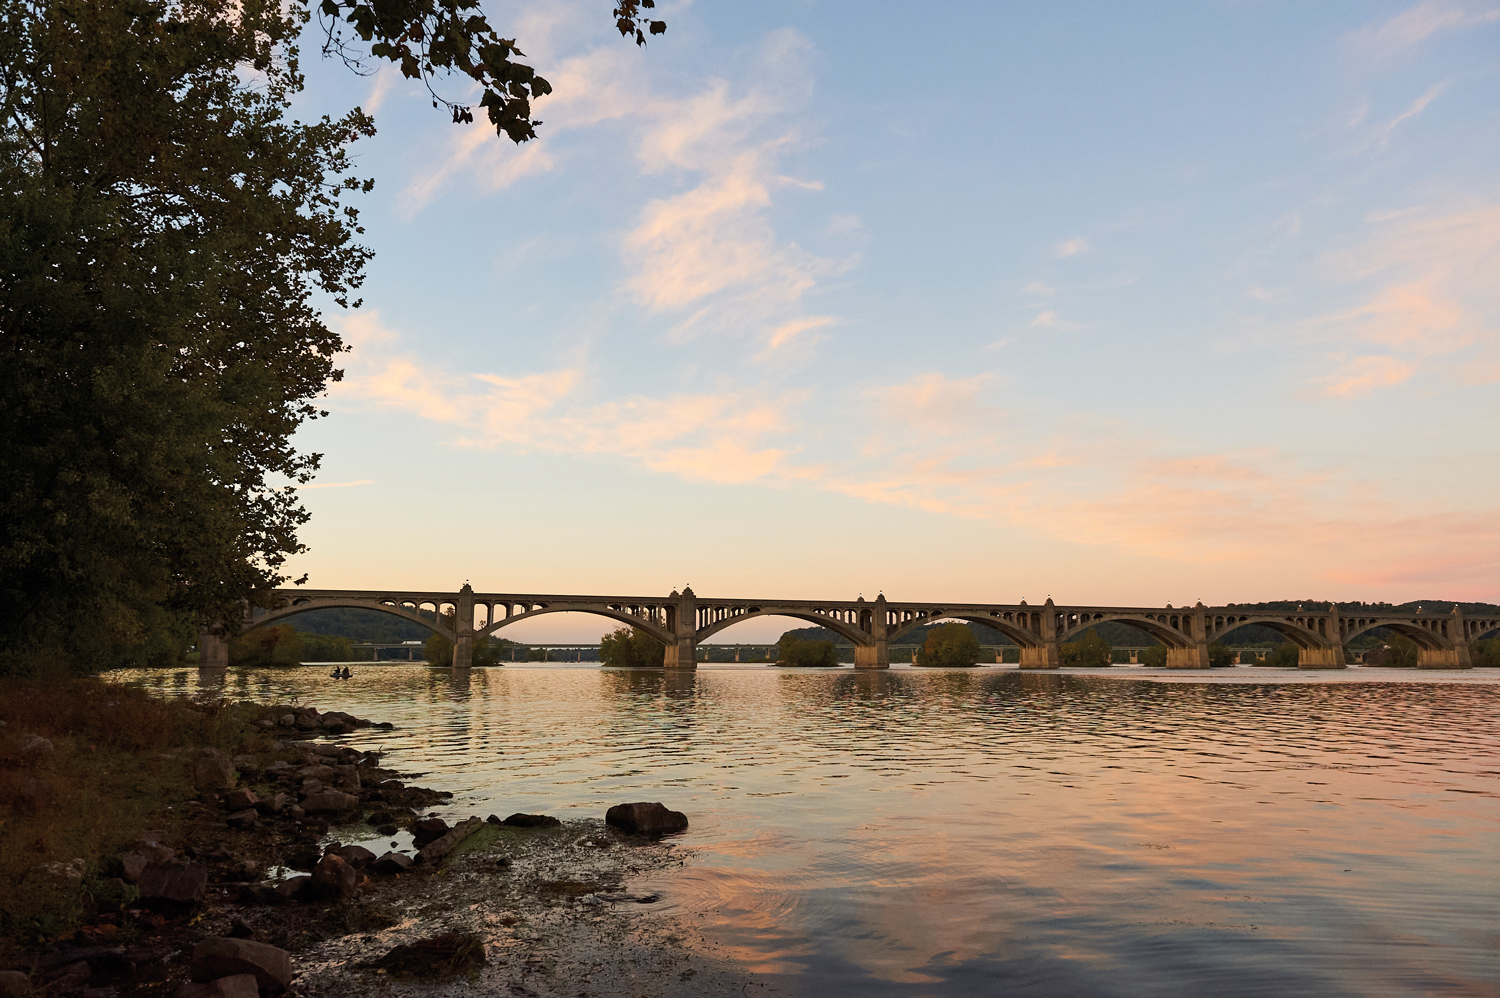 The Susquehanna River: The Main Street of Western Lancaster and